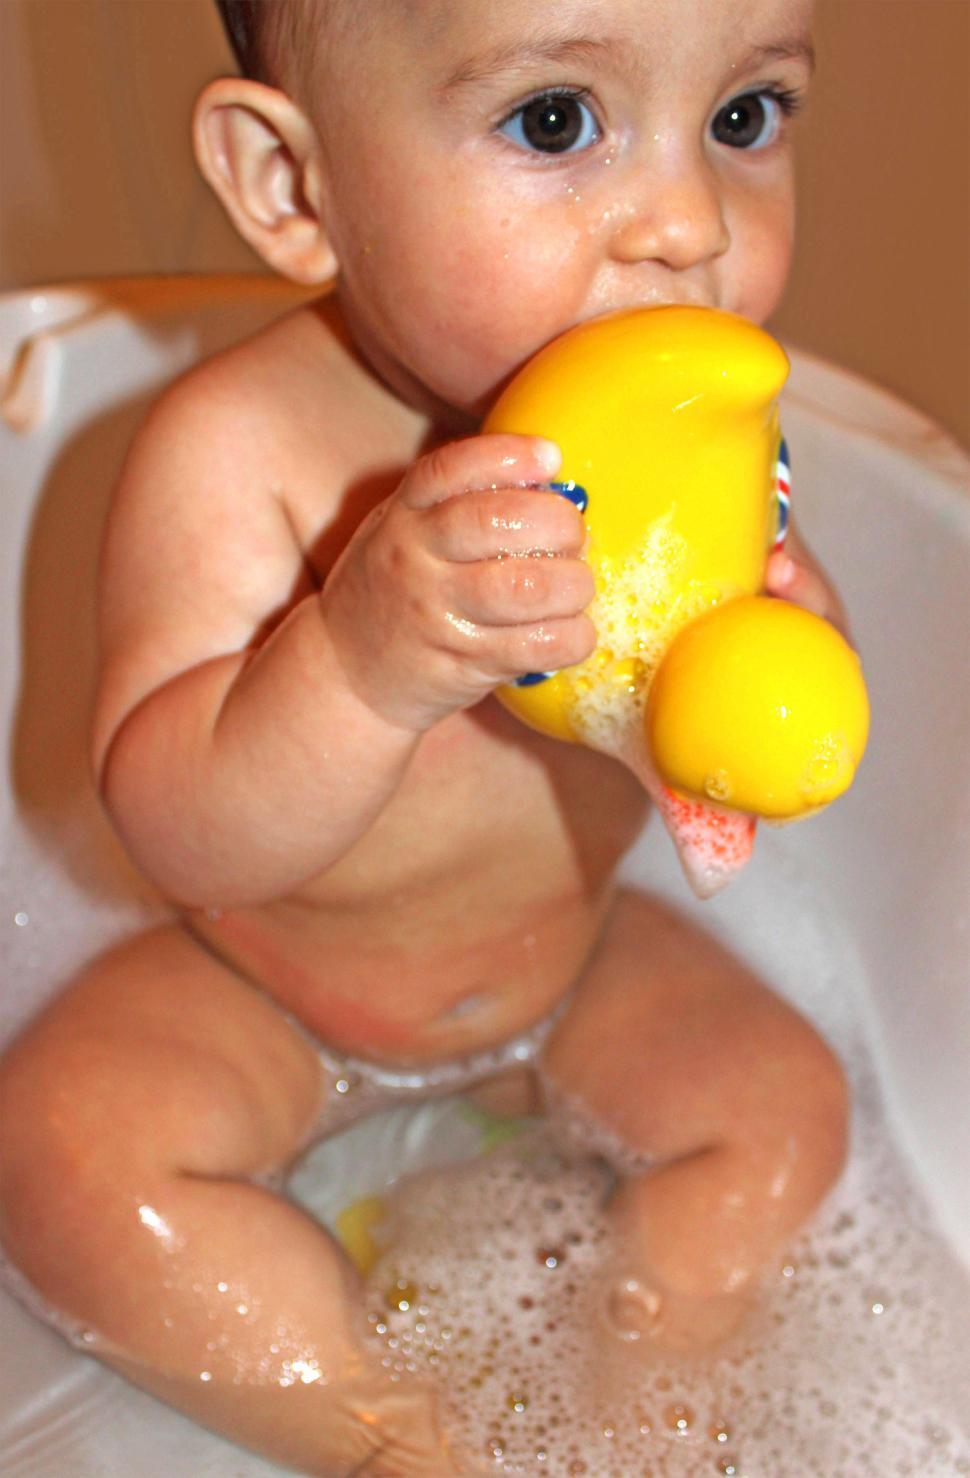 Free Image of Baby bathing while holding and suckling a yellow duck toy 